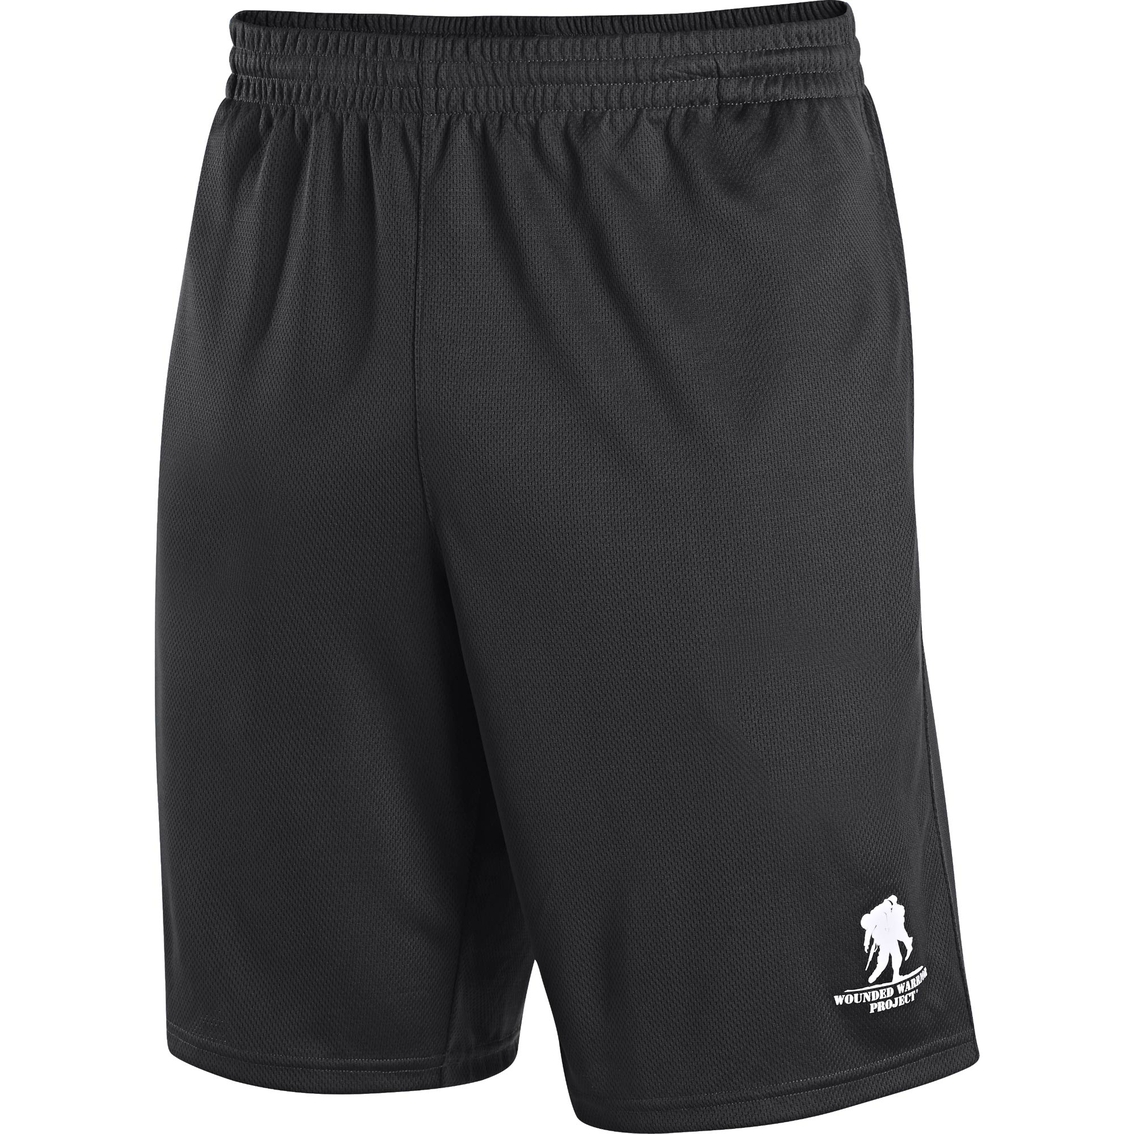 wounded warrior project shorts